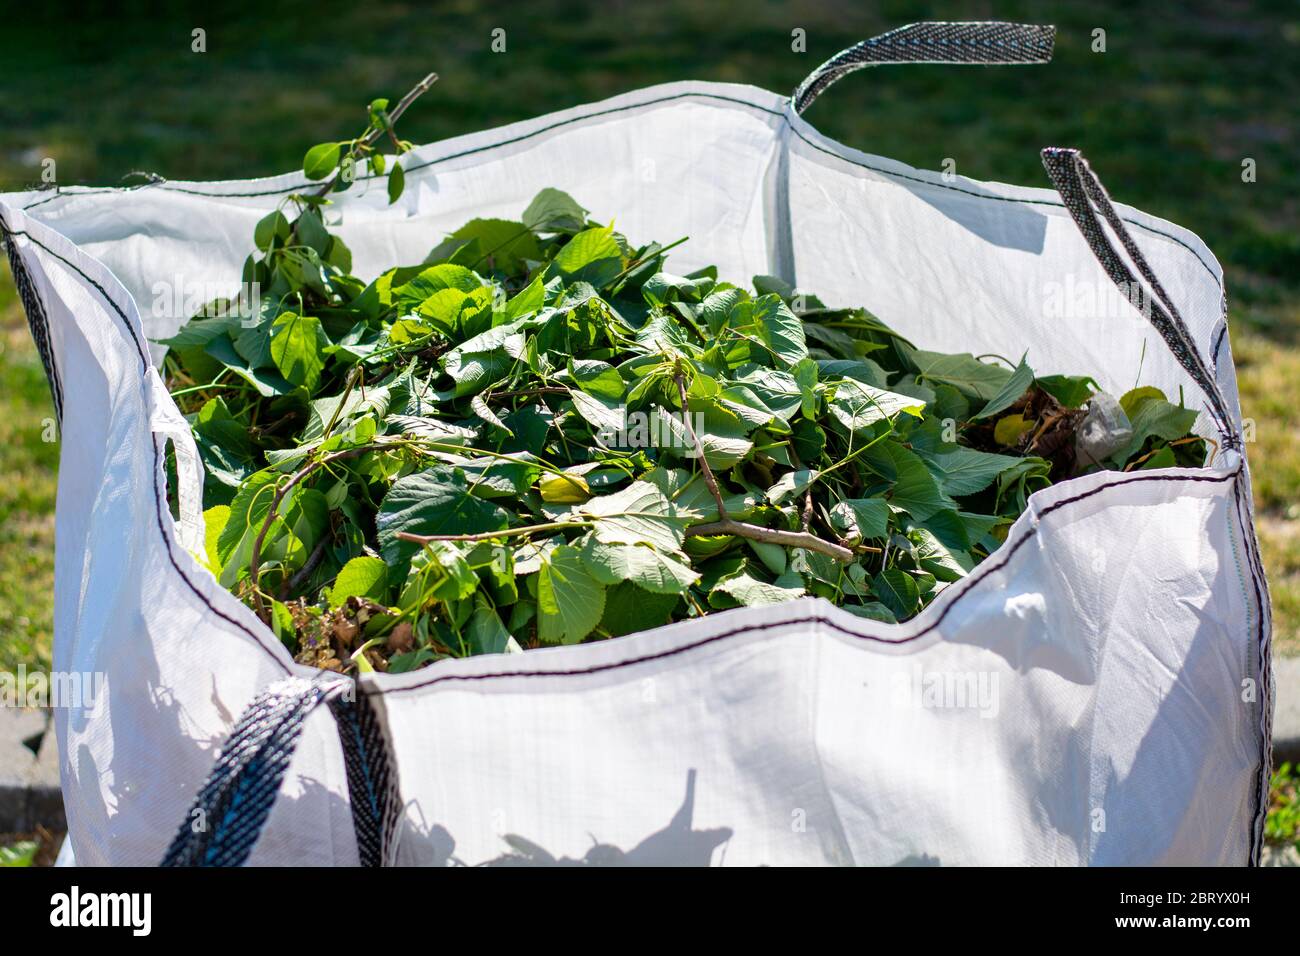 Big white bag with organic green garden waste. Local councils collecting green waste to process it into green energy and compost. Stock Photo